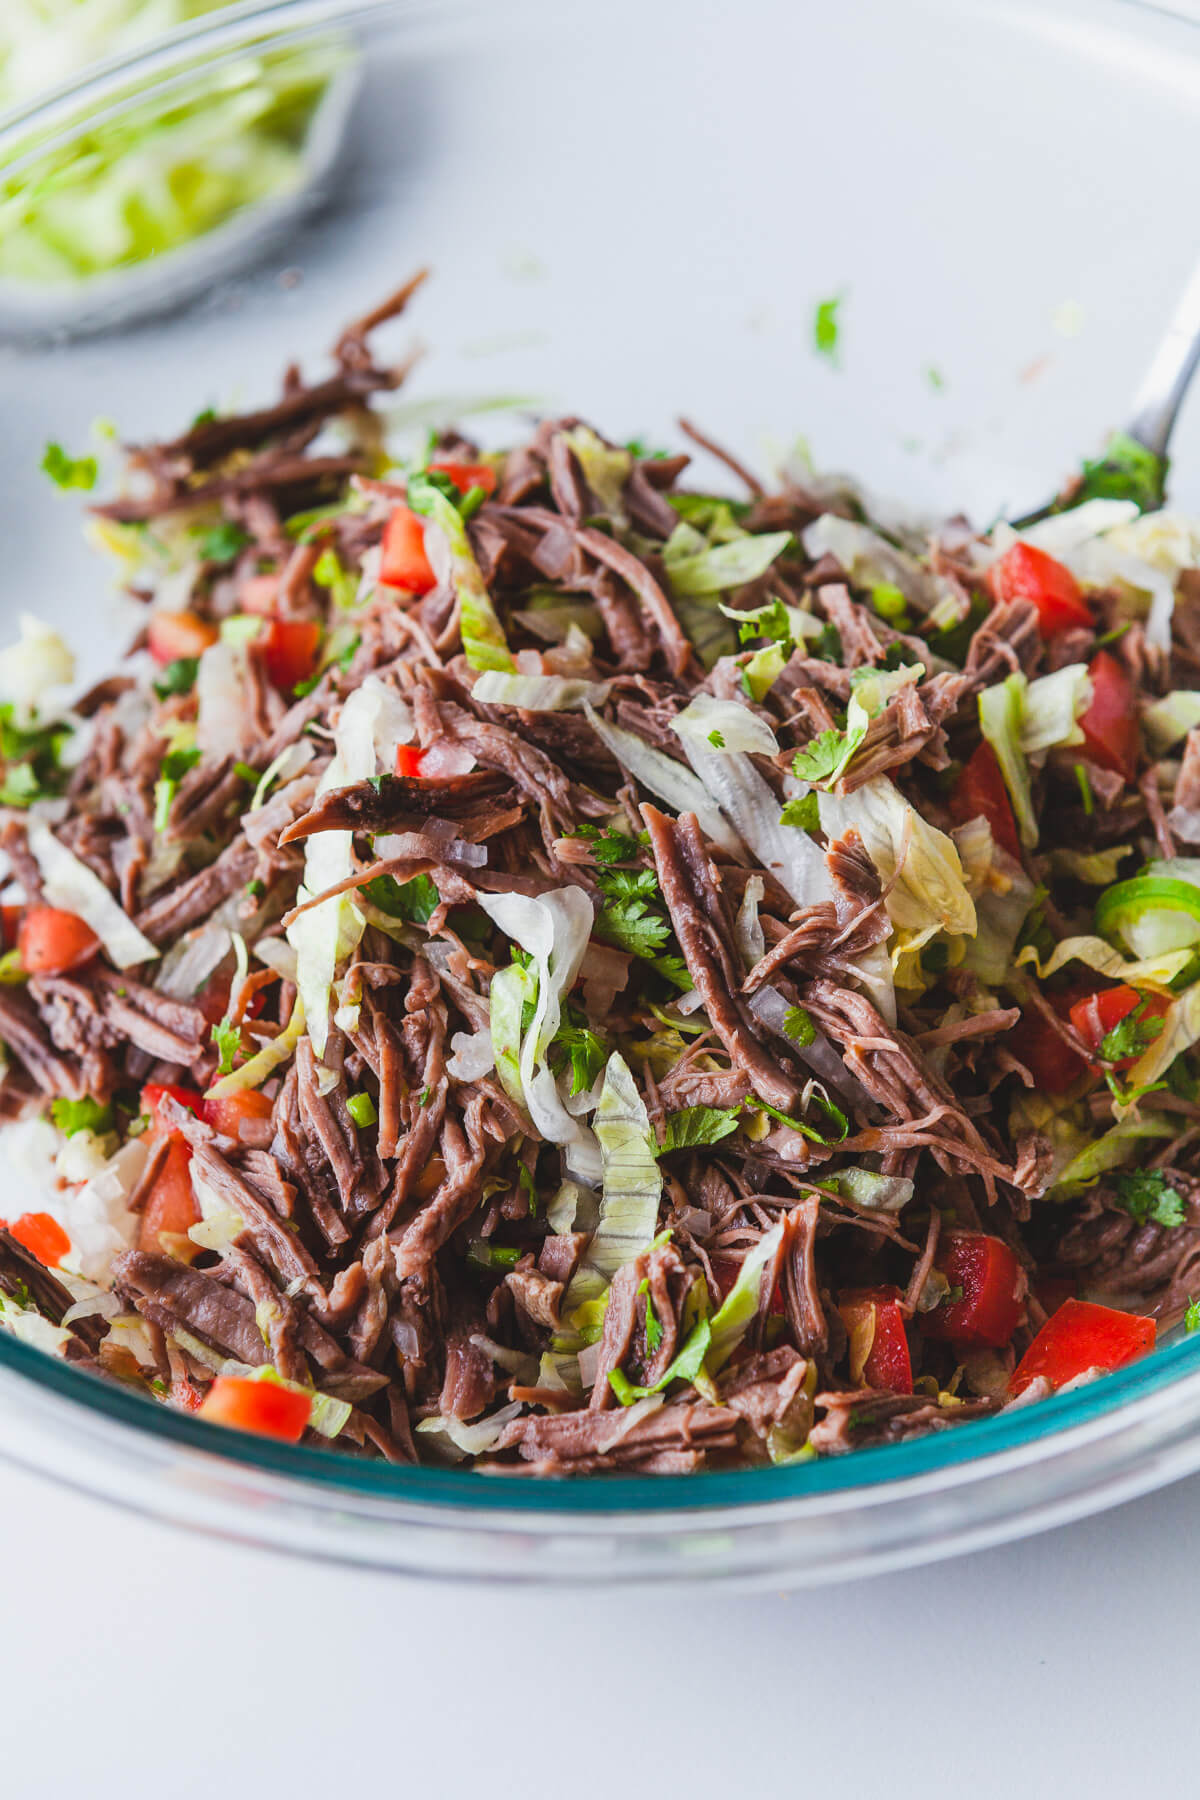 A glass bowl filled with brightly coloured Salpicón (Mexican Shredded Meat Salad).